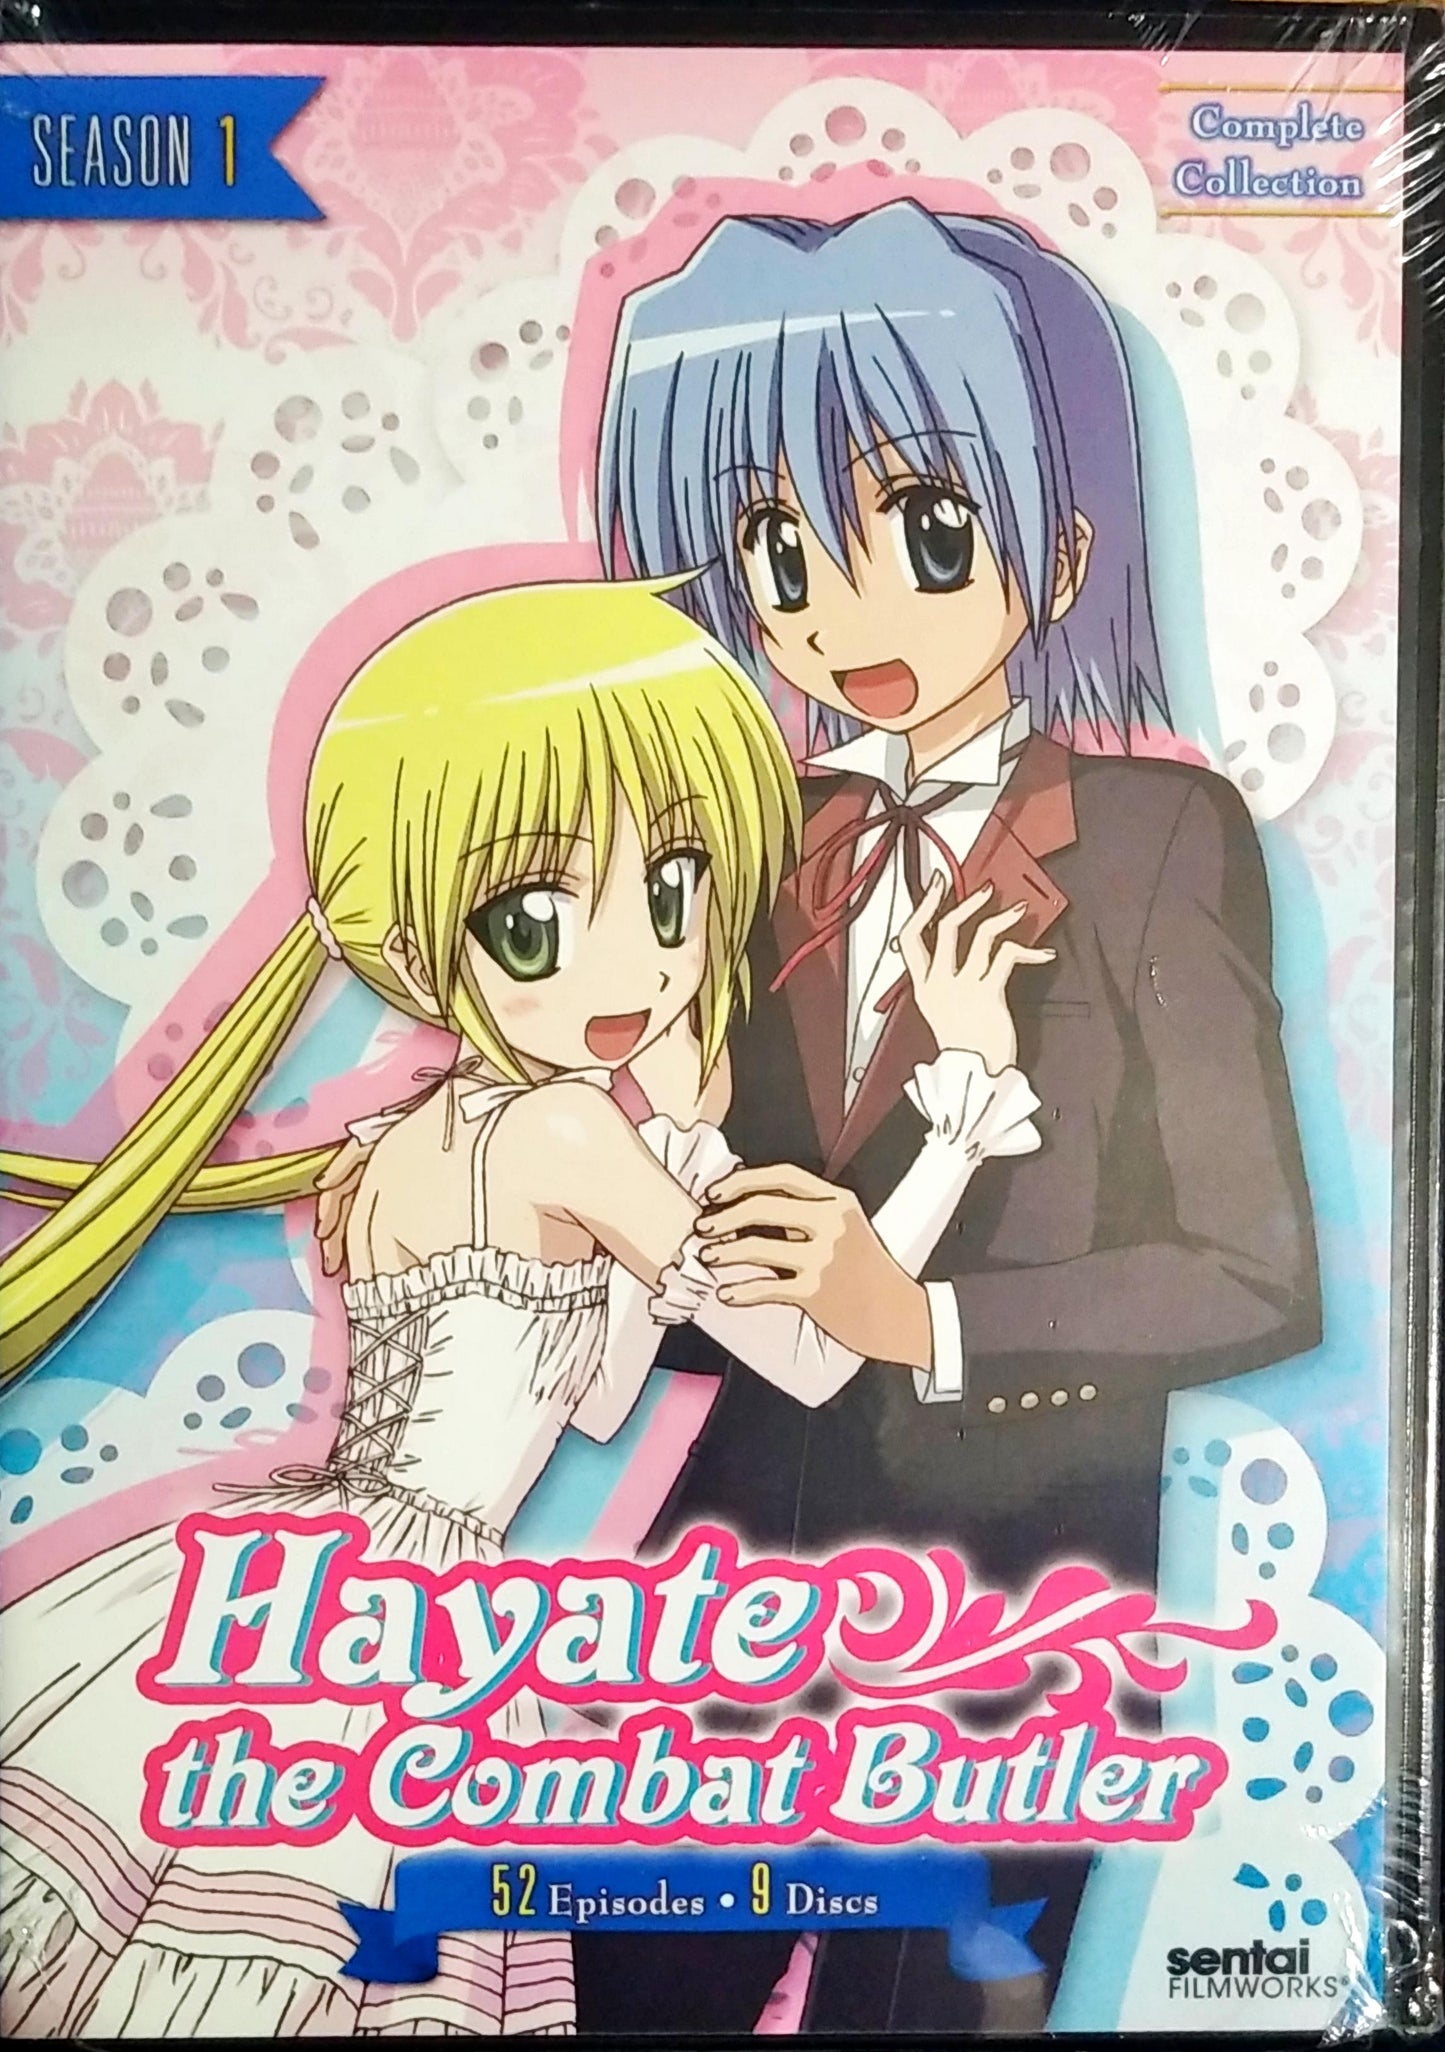 Hayate the Combat Butler Season 1 DVD Complete Collection Sealed